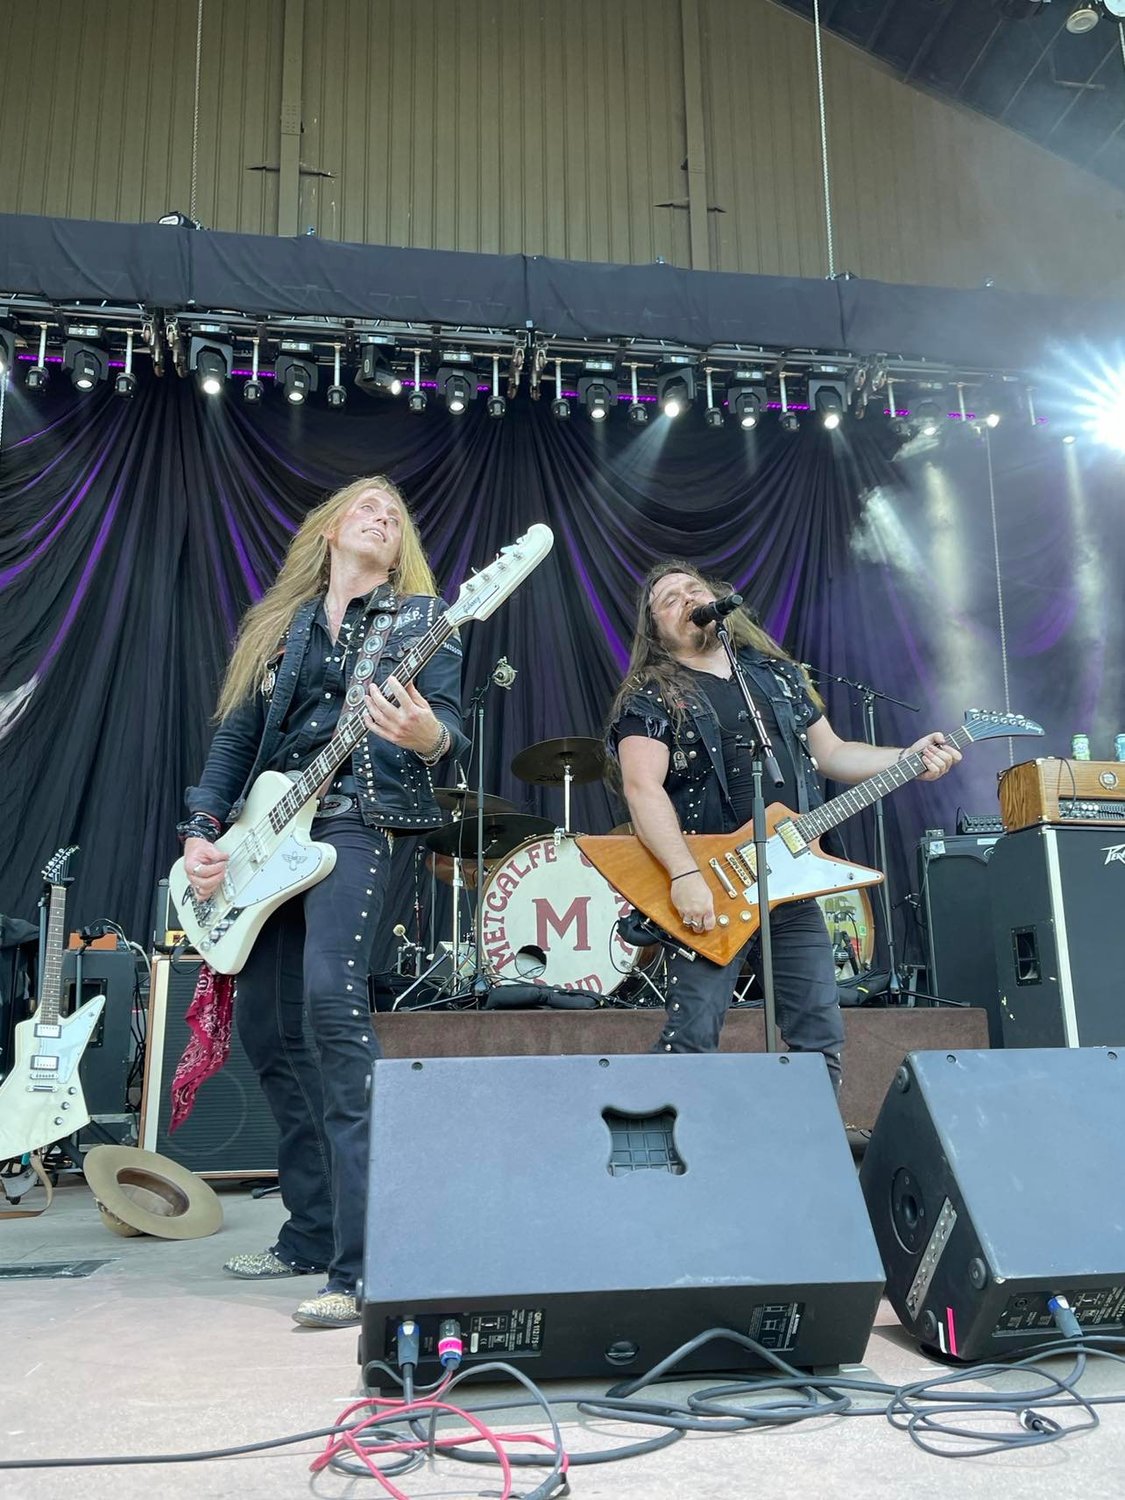 The Comancheros opened the show with a southern rock sound. Pictured left is lead guitarist and vocalist Bradley Hutchinson and right, Tanner Jones of Kirksville, Mo.